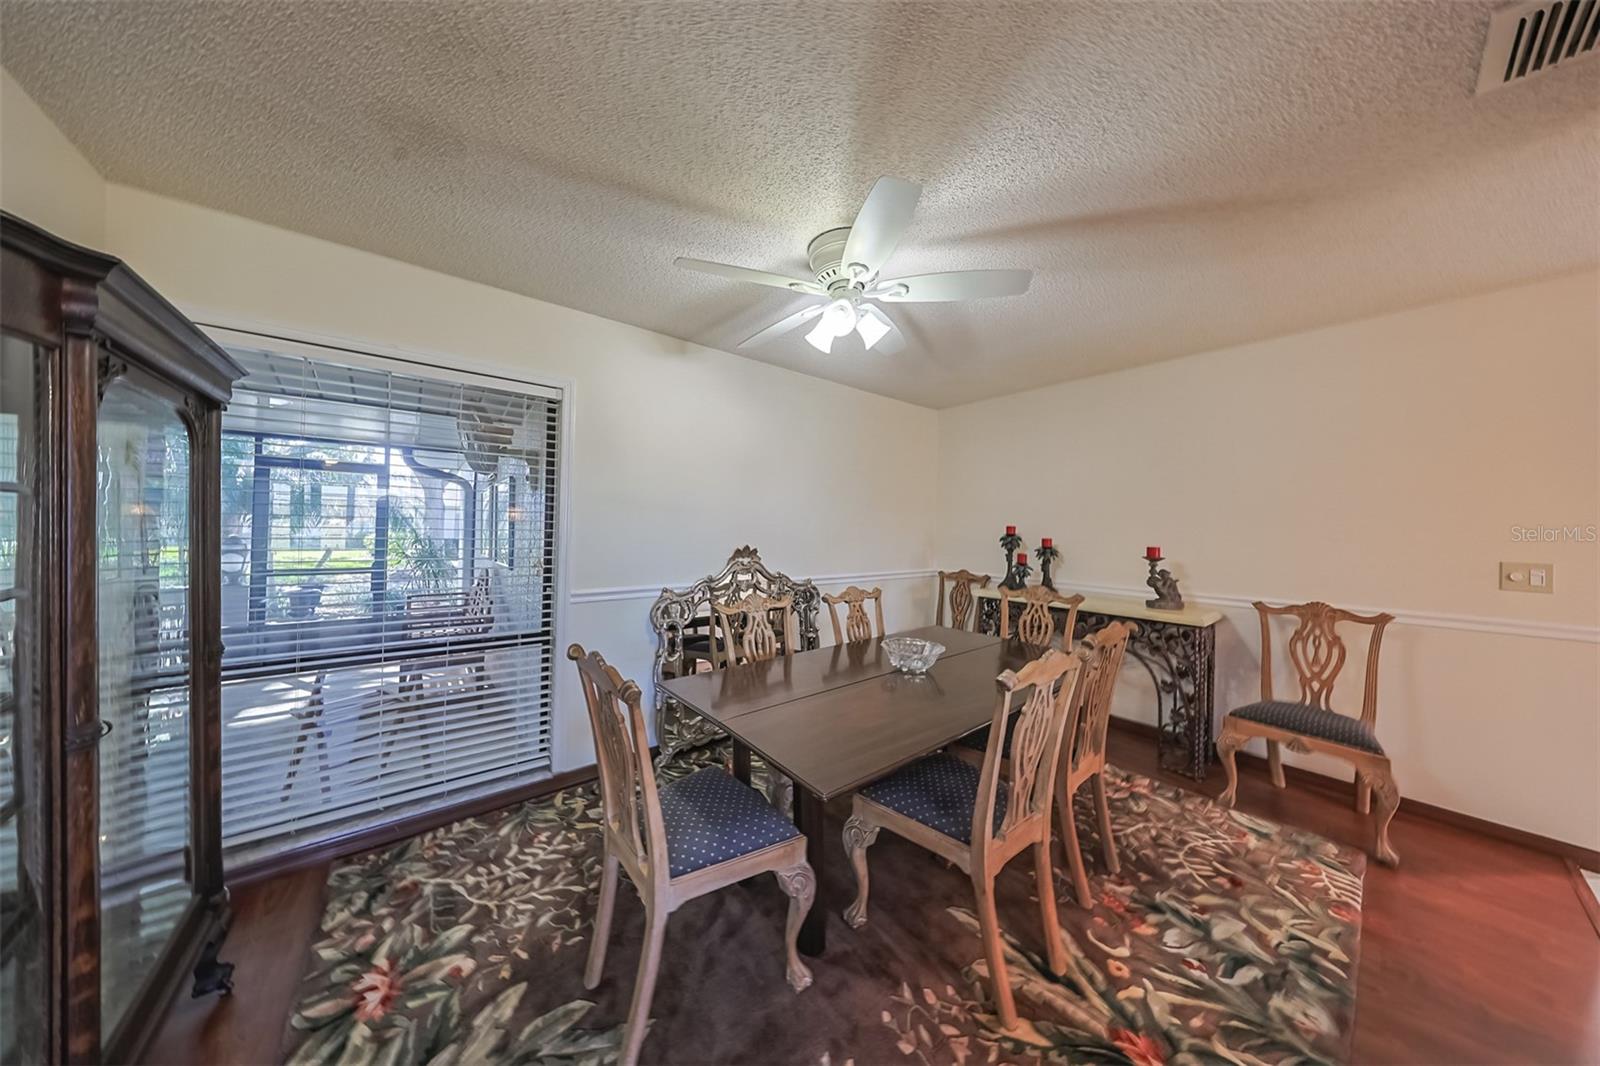 Dining room offers a cozy space for private dinners or playing cards with friends.  Easy access to the kitchen makes for perfect entertaining opportunities and includes a ceiling fan with light.